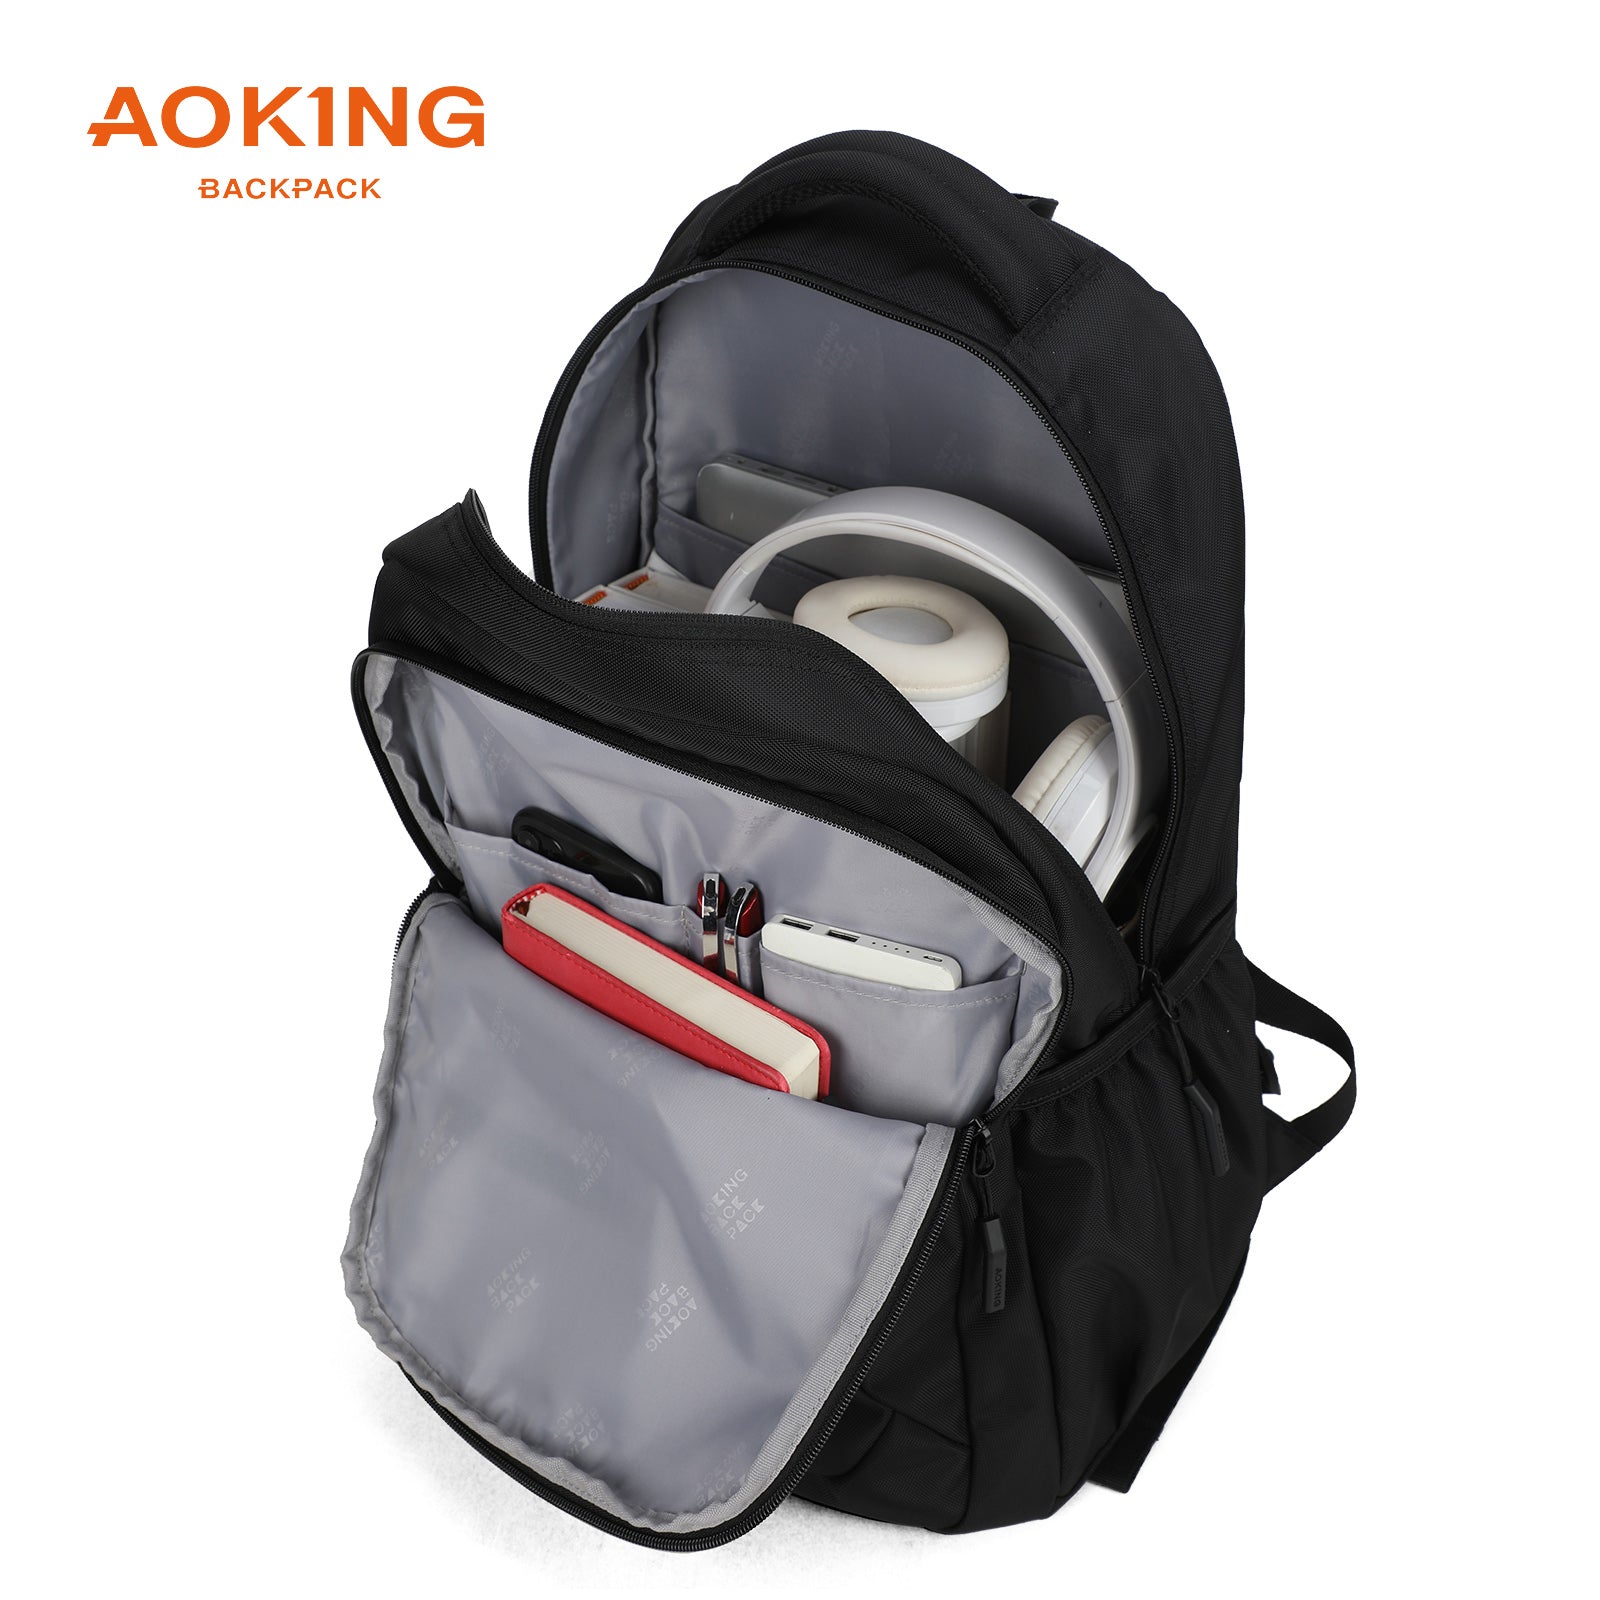 Aoking Backpack White Large Capacity Casual Backpack Student Bag XN3339